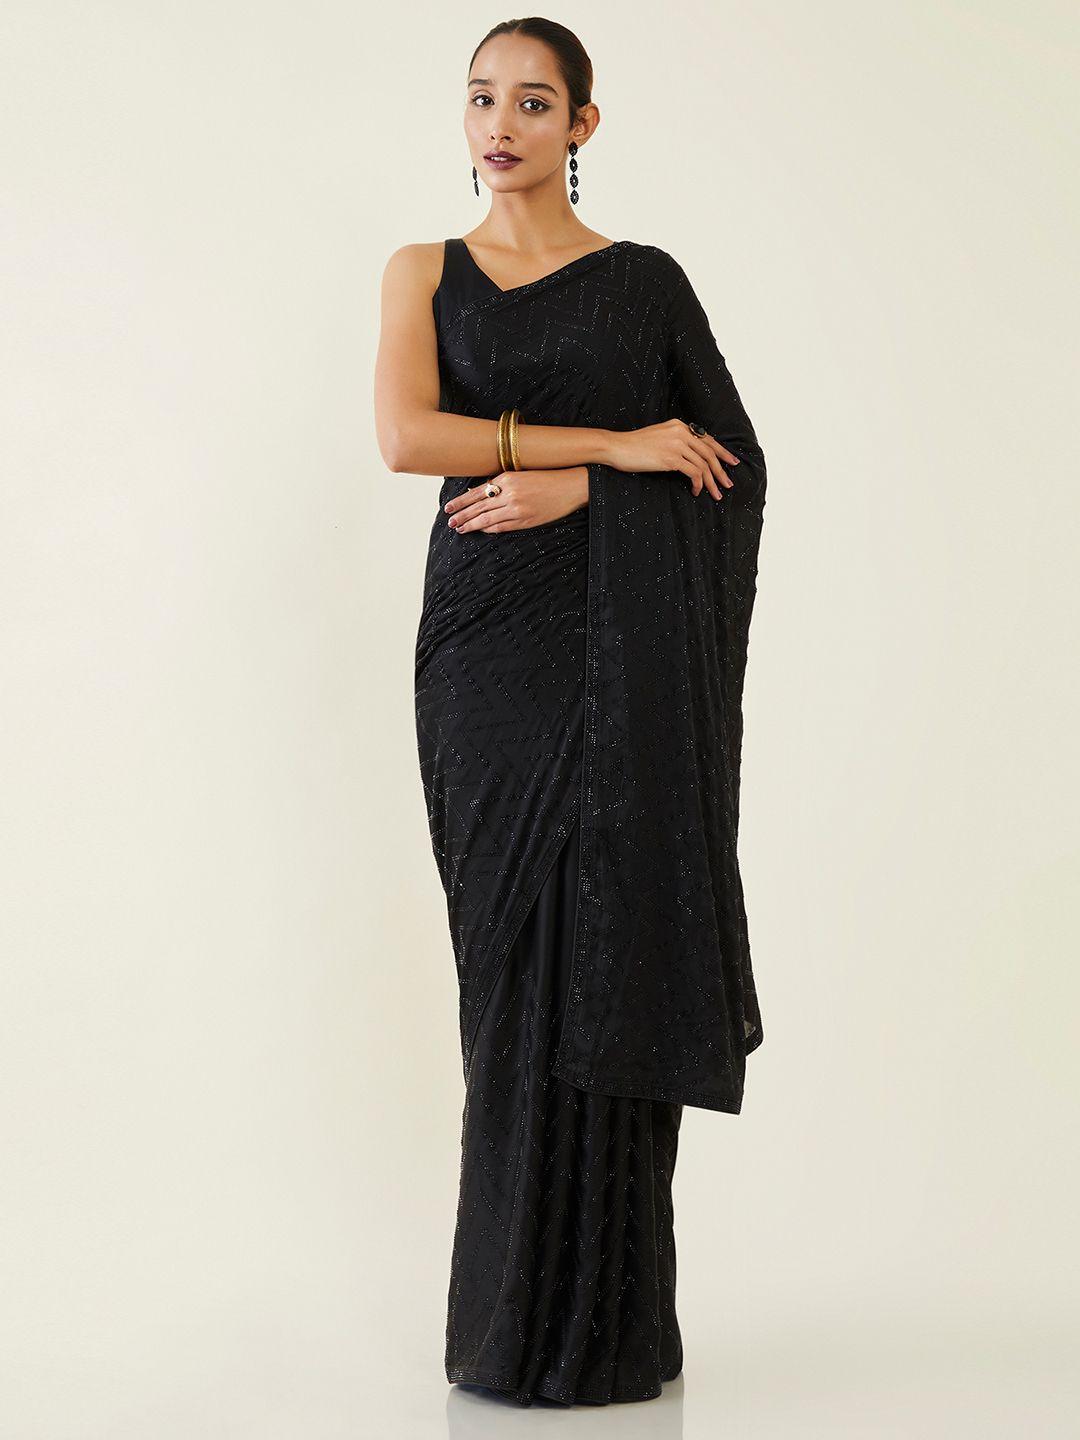 soch-black-embellished-beads-and-stones-saree